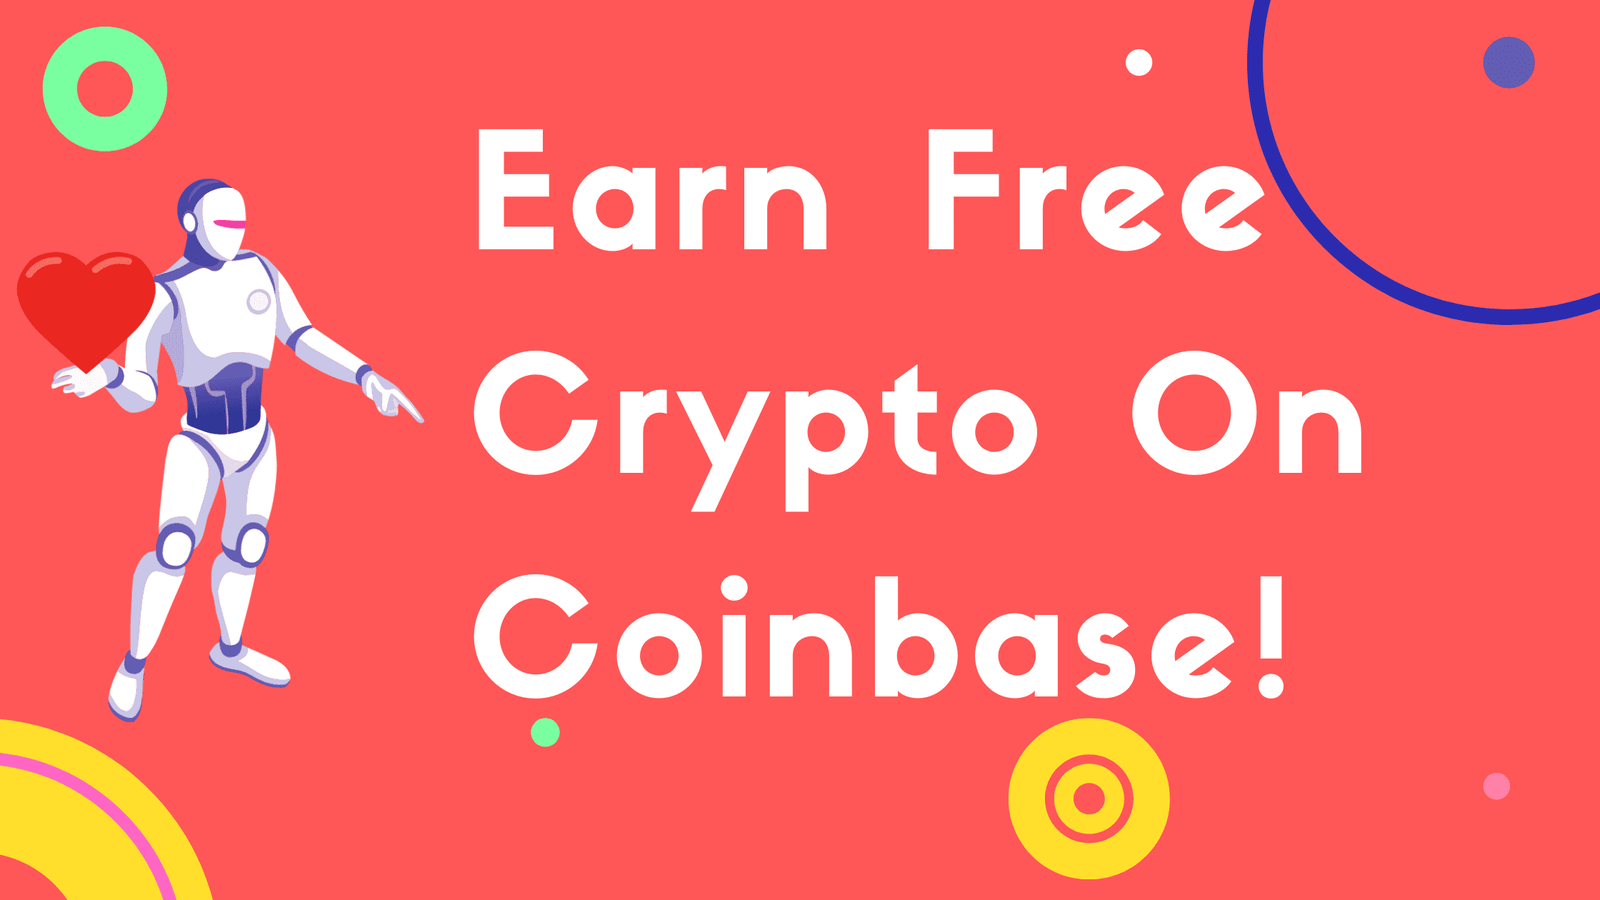 How to earn free crypto (Tezos, EOS and more) with a Coinbase account -  crypto-stepbystep